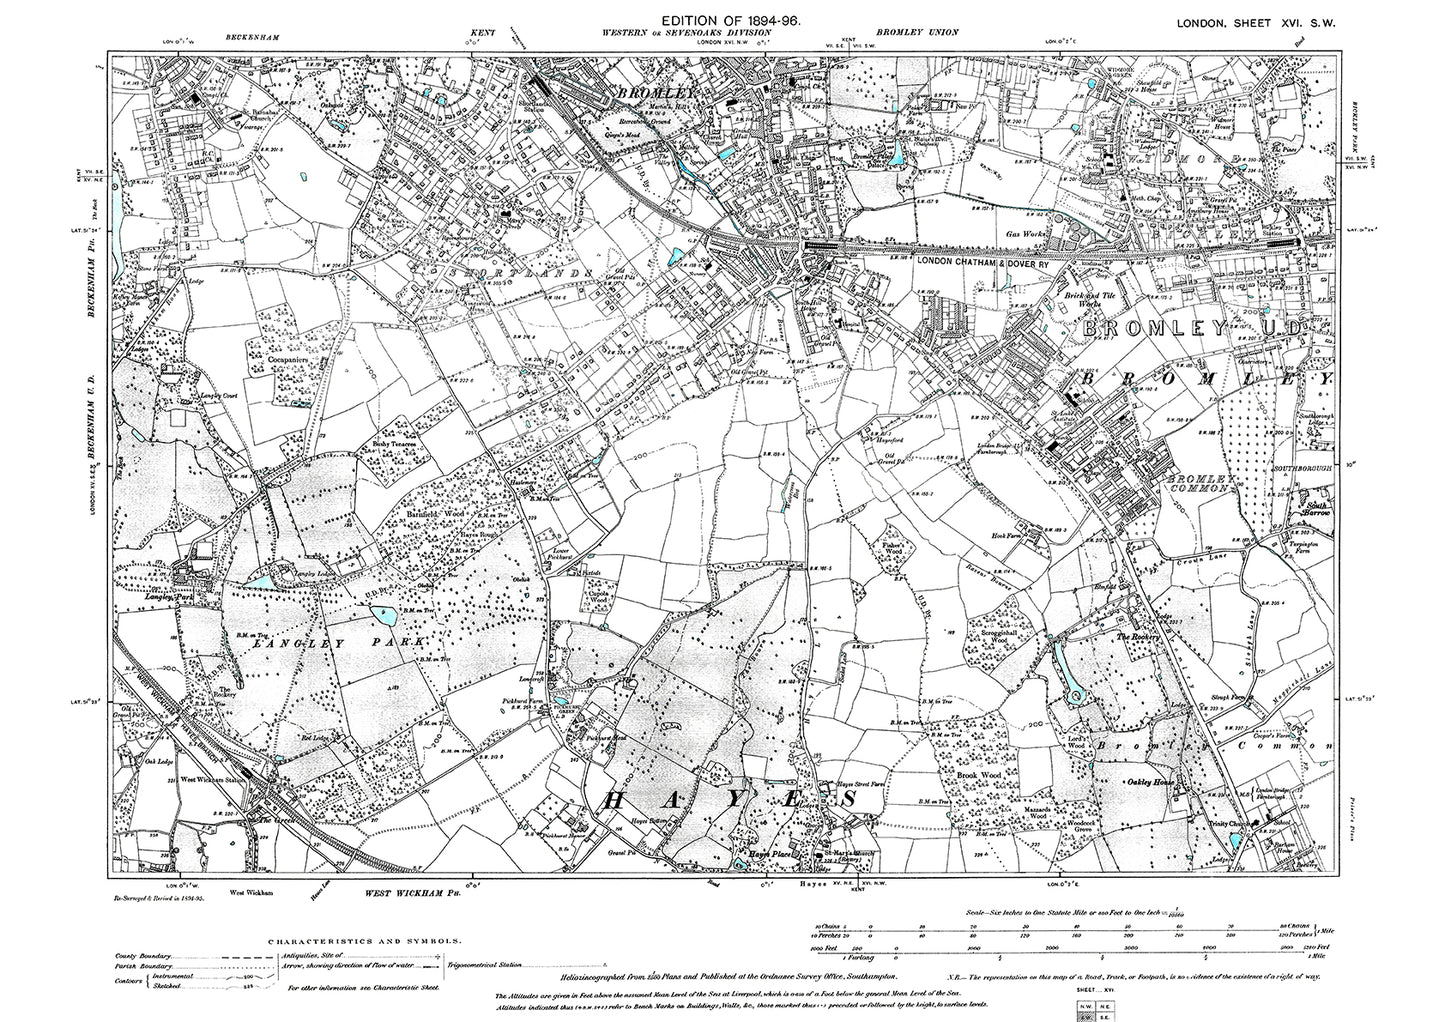 Bromley (south), Widmore, Bromley Common, Langley Park, old map London 1896, 16SW